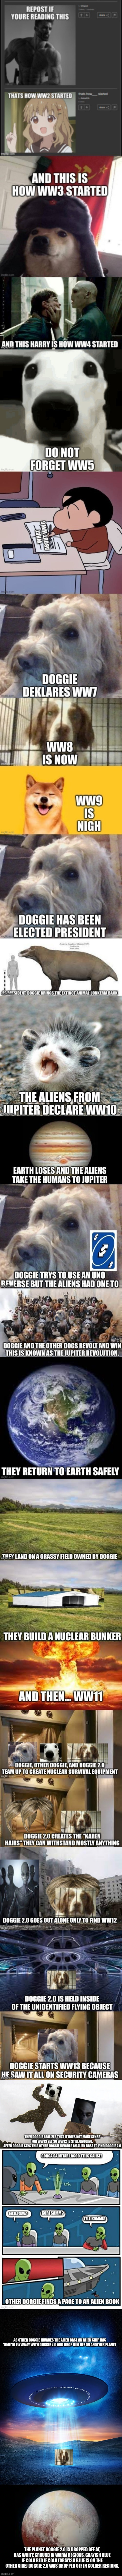 AS OTHER DOGGIE INVADES THE ALIEN BASE AN ALIEN SHIP HAS TIME TO FLY AWAY WITH DOGGIE 2.0 AND DROP HIM OFF ON ANOTHER PLANET; THE PLANET DOGGIE 2.0 IS DROPPED OFF AT, HAS WHITE GROUND IN WARM REGIONS, GRAYISH BLUE IF COLD RED IF COLD (GRAYISH BLUE IS ON THE OTHER SIDE) DOGGIE 2.0 WAS DROPPED OFF IN COLDER REGIONS. | image tagged in ufo | made w/ Imgflip meme maker